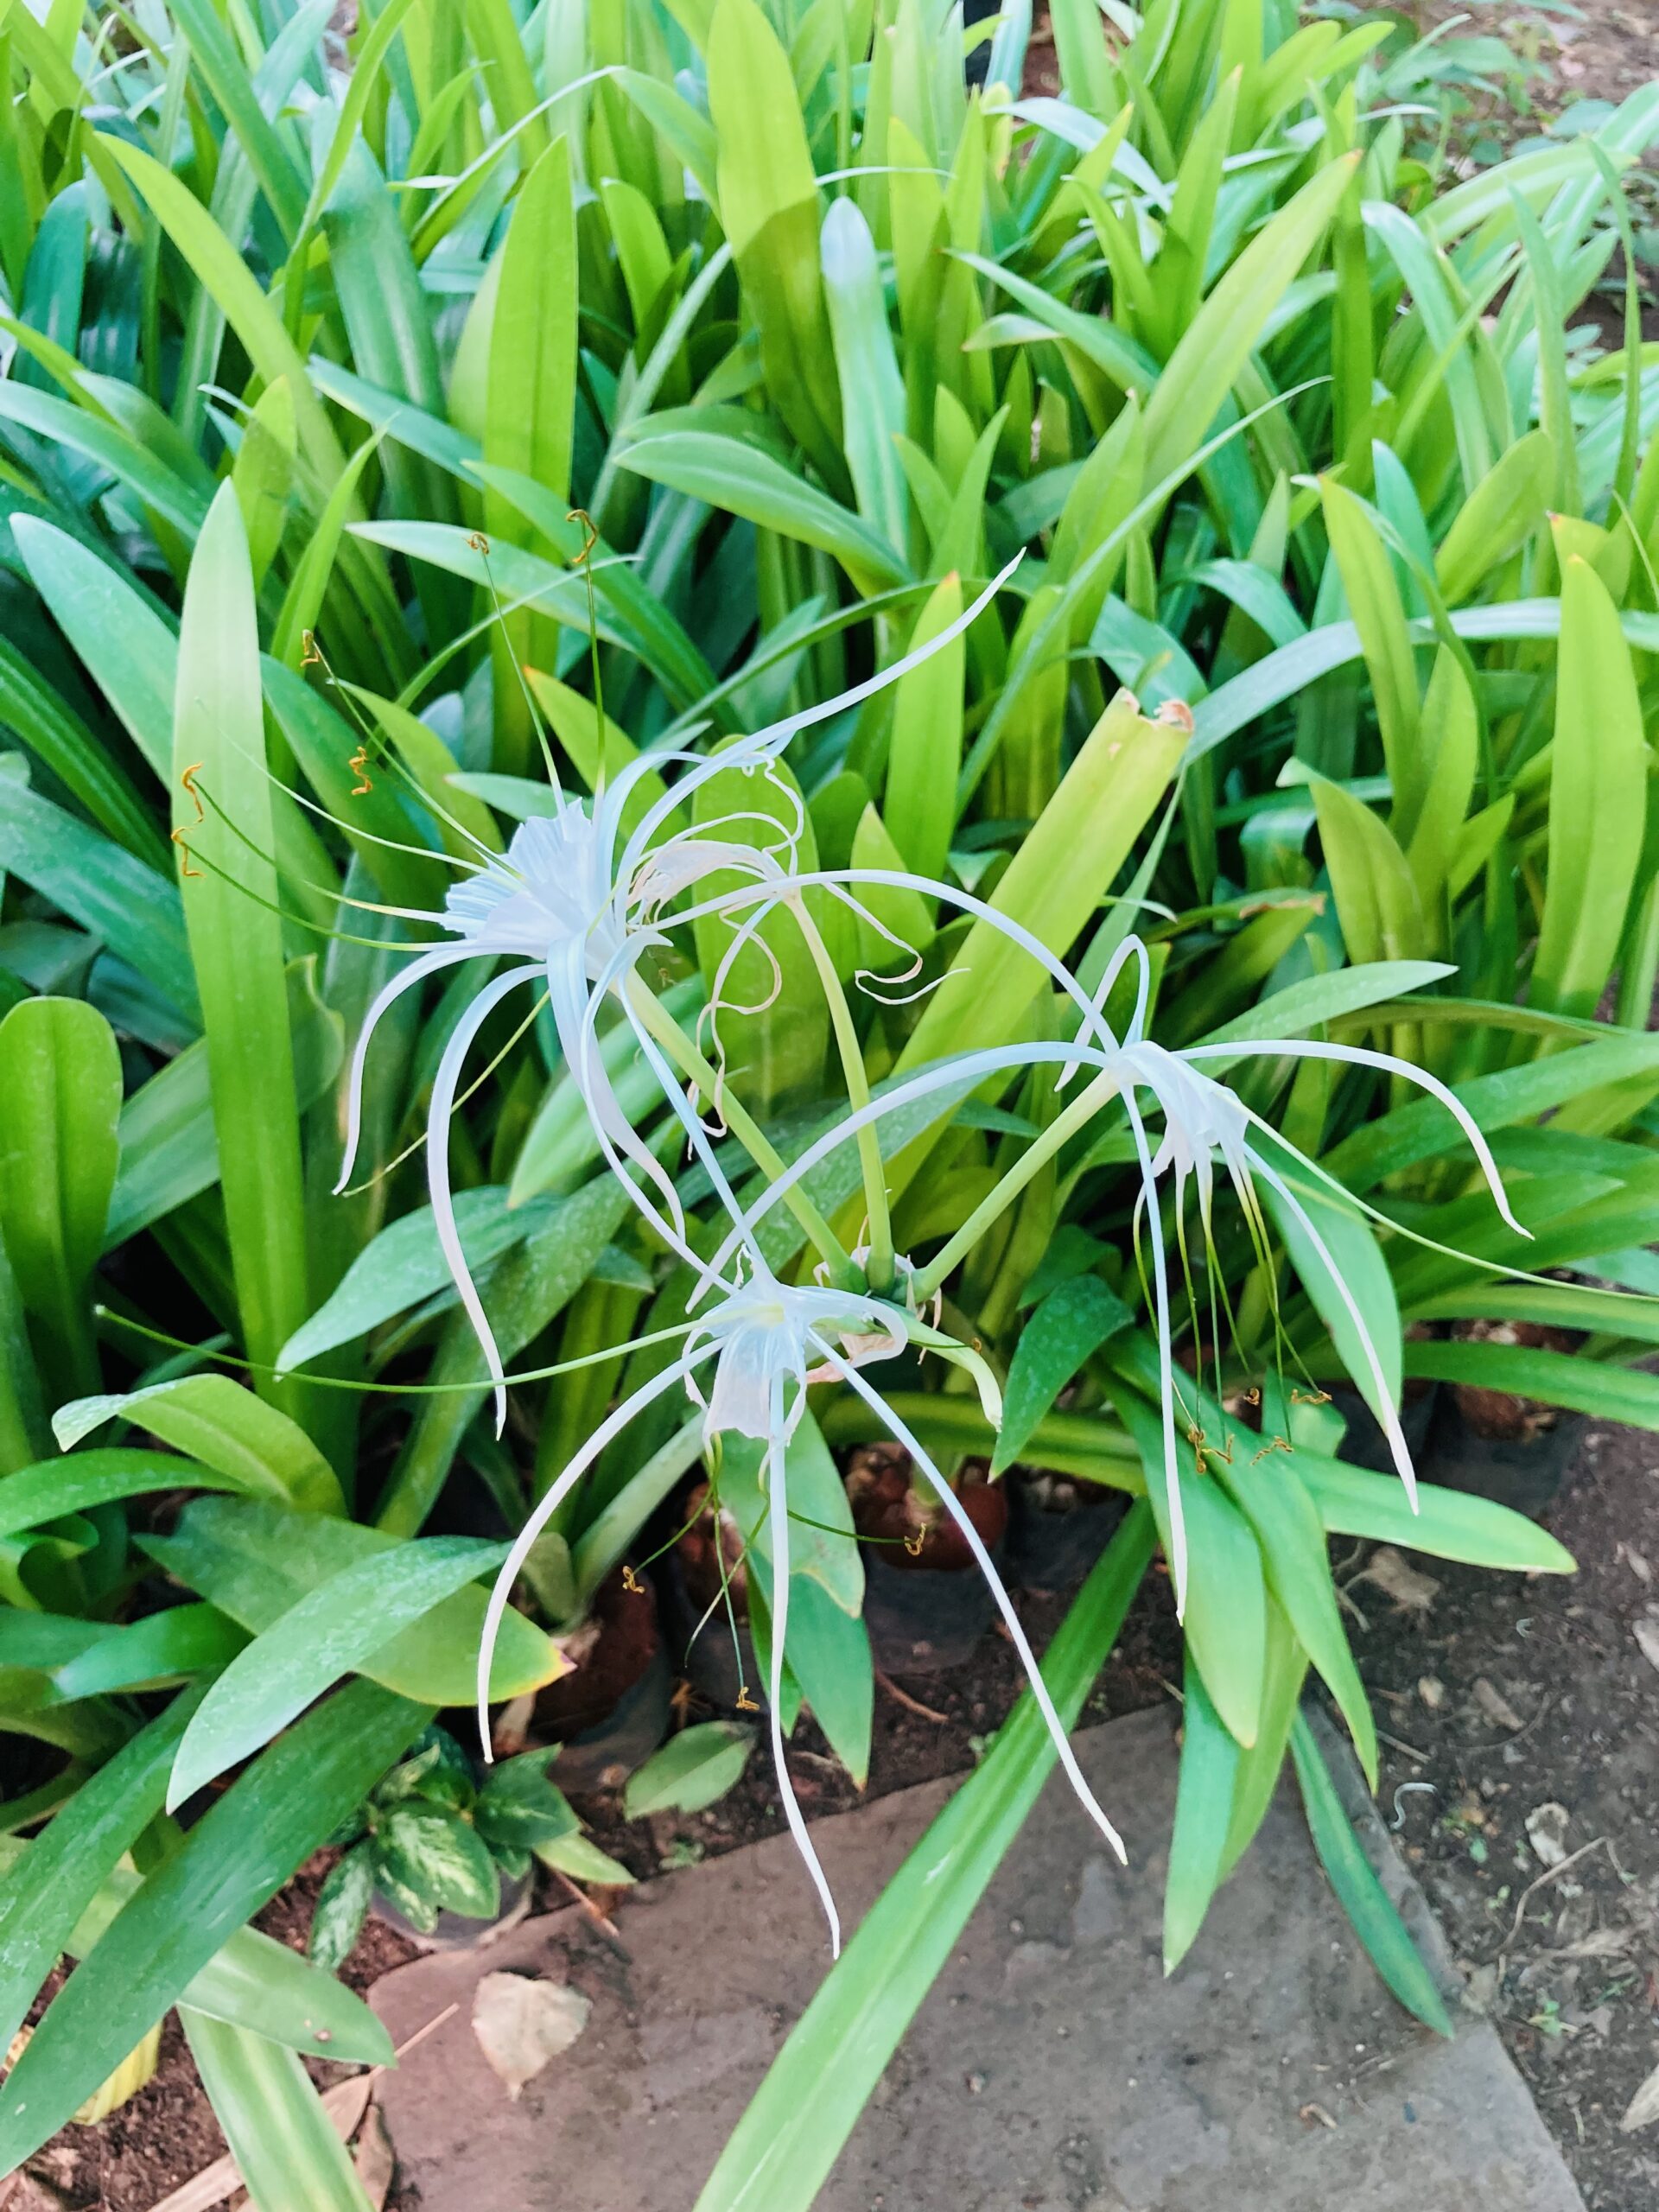 How to care for spider lilies